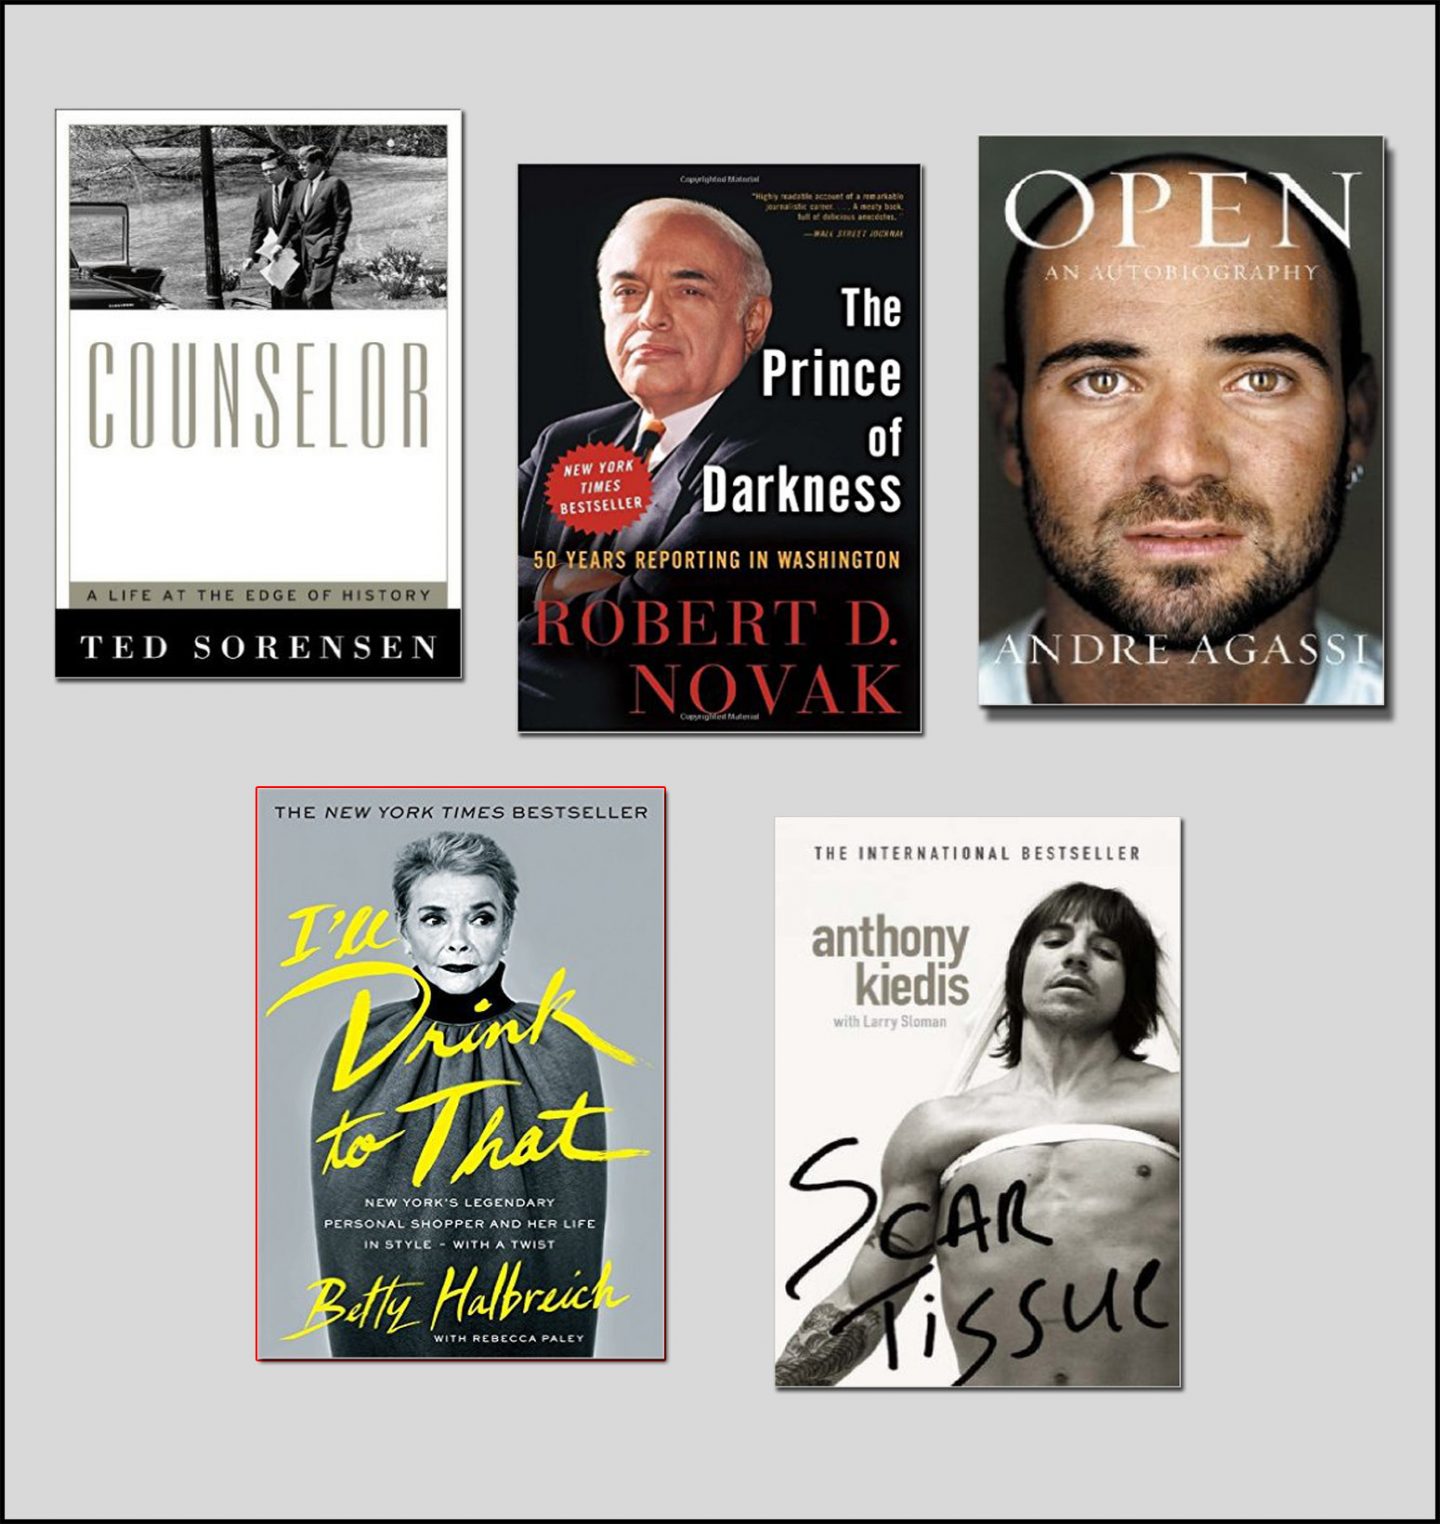 autobiographies biographies and other factual information